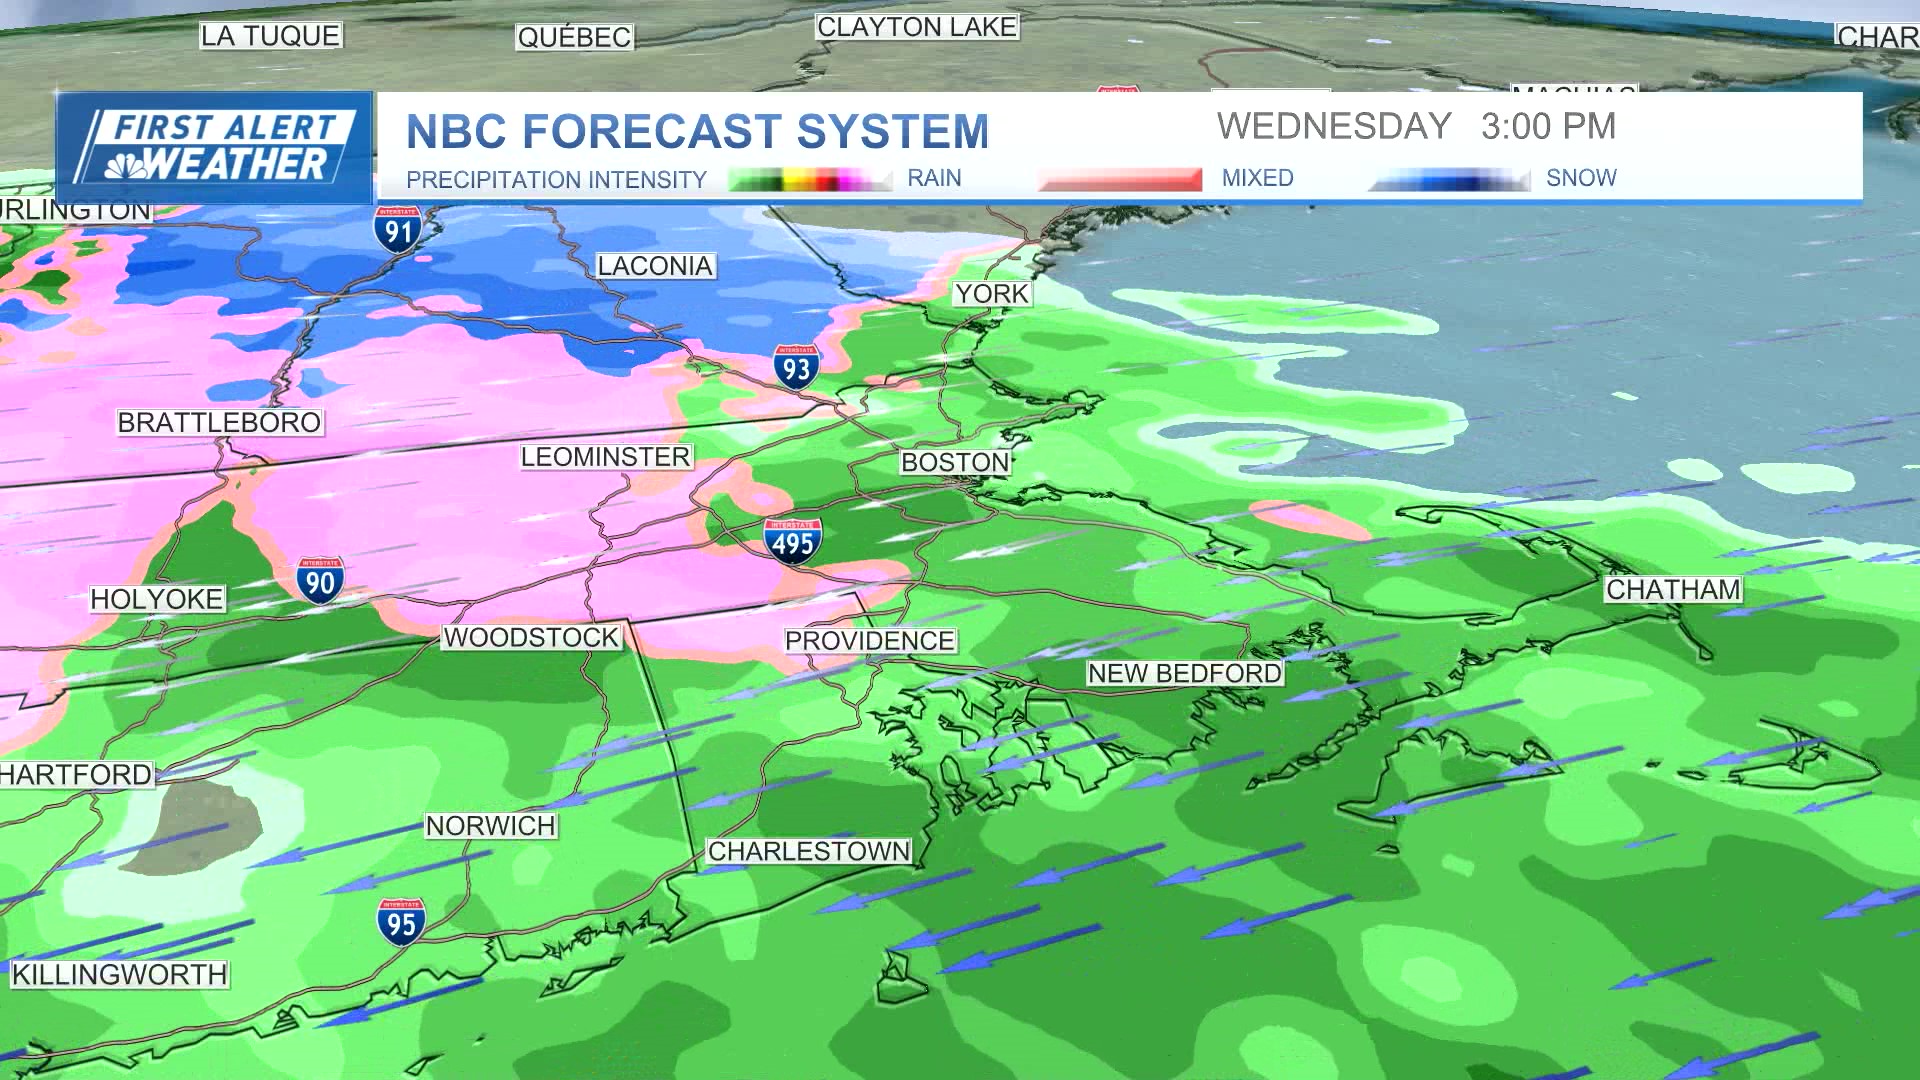 Rain is expected to be widespread across Boston, with a wintry mix in Worcester and into southern New Hampshire, in the early afternoon of Wednesday, April 3, 2024, according to the NBC forecast system.